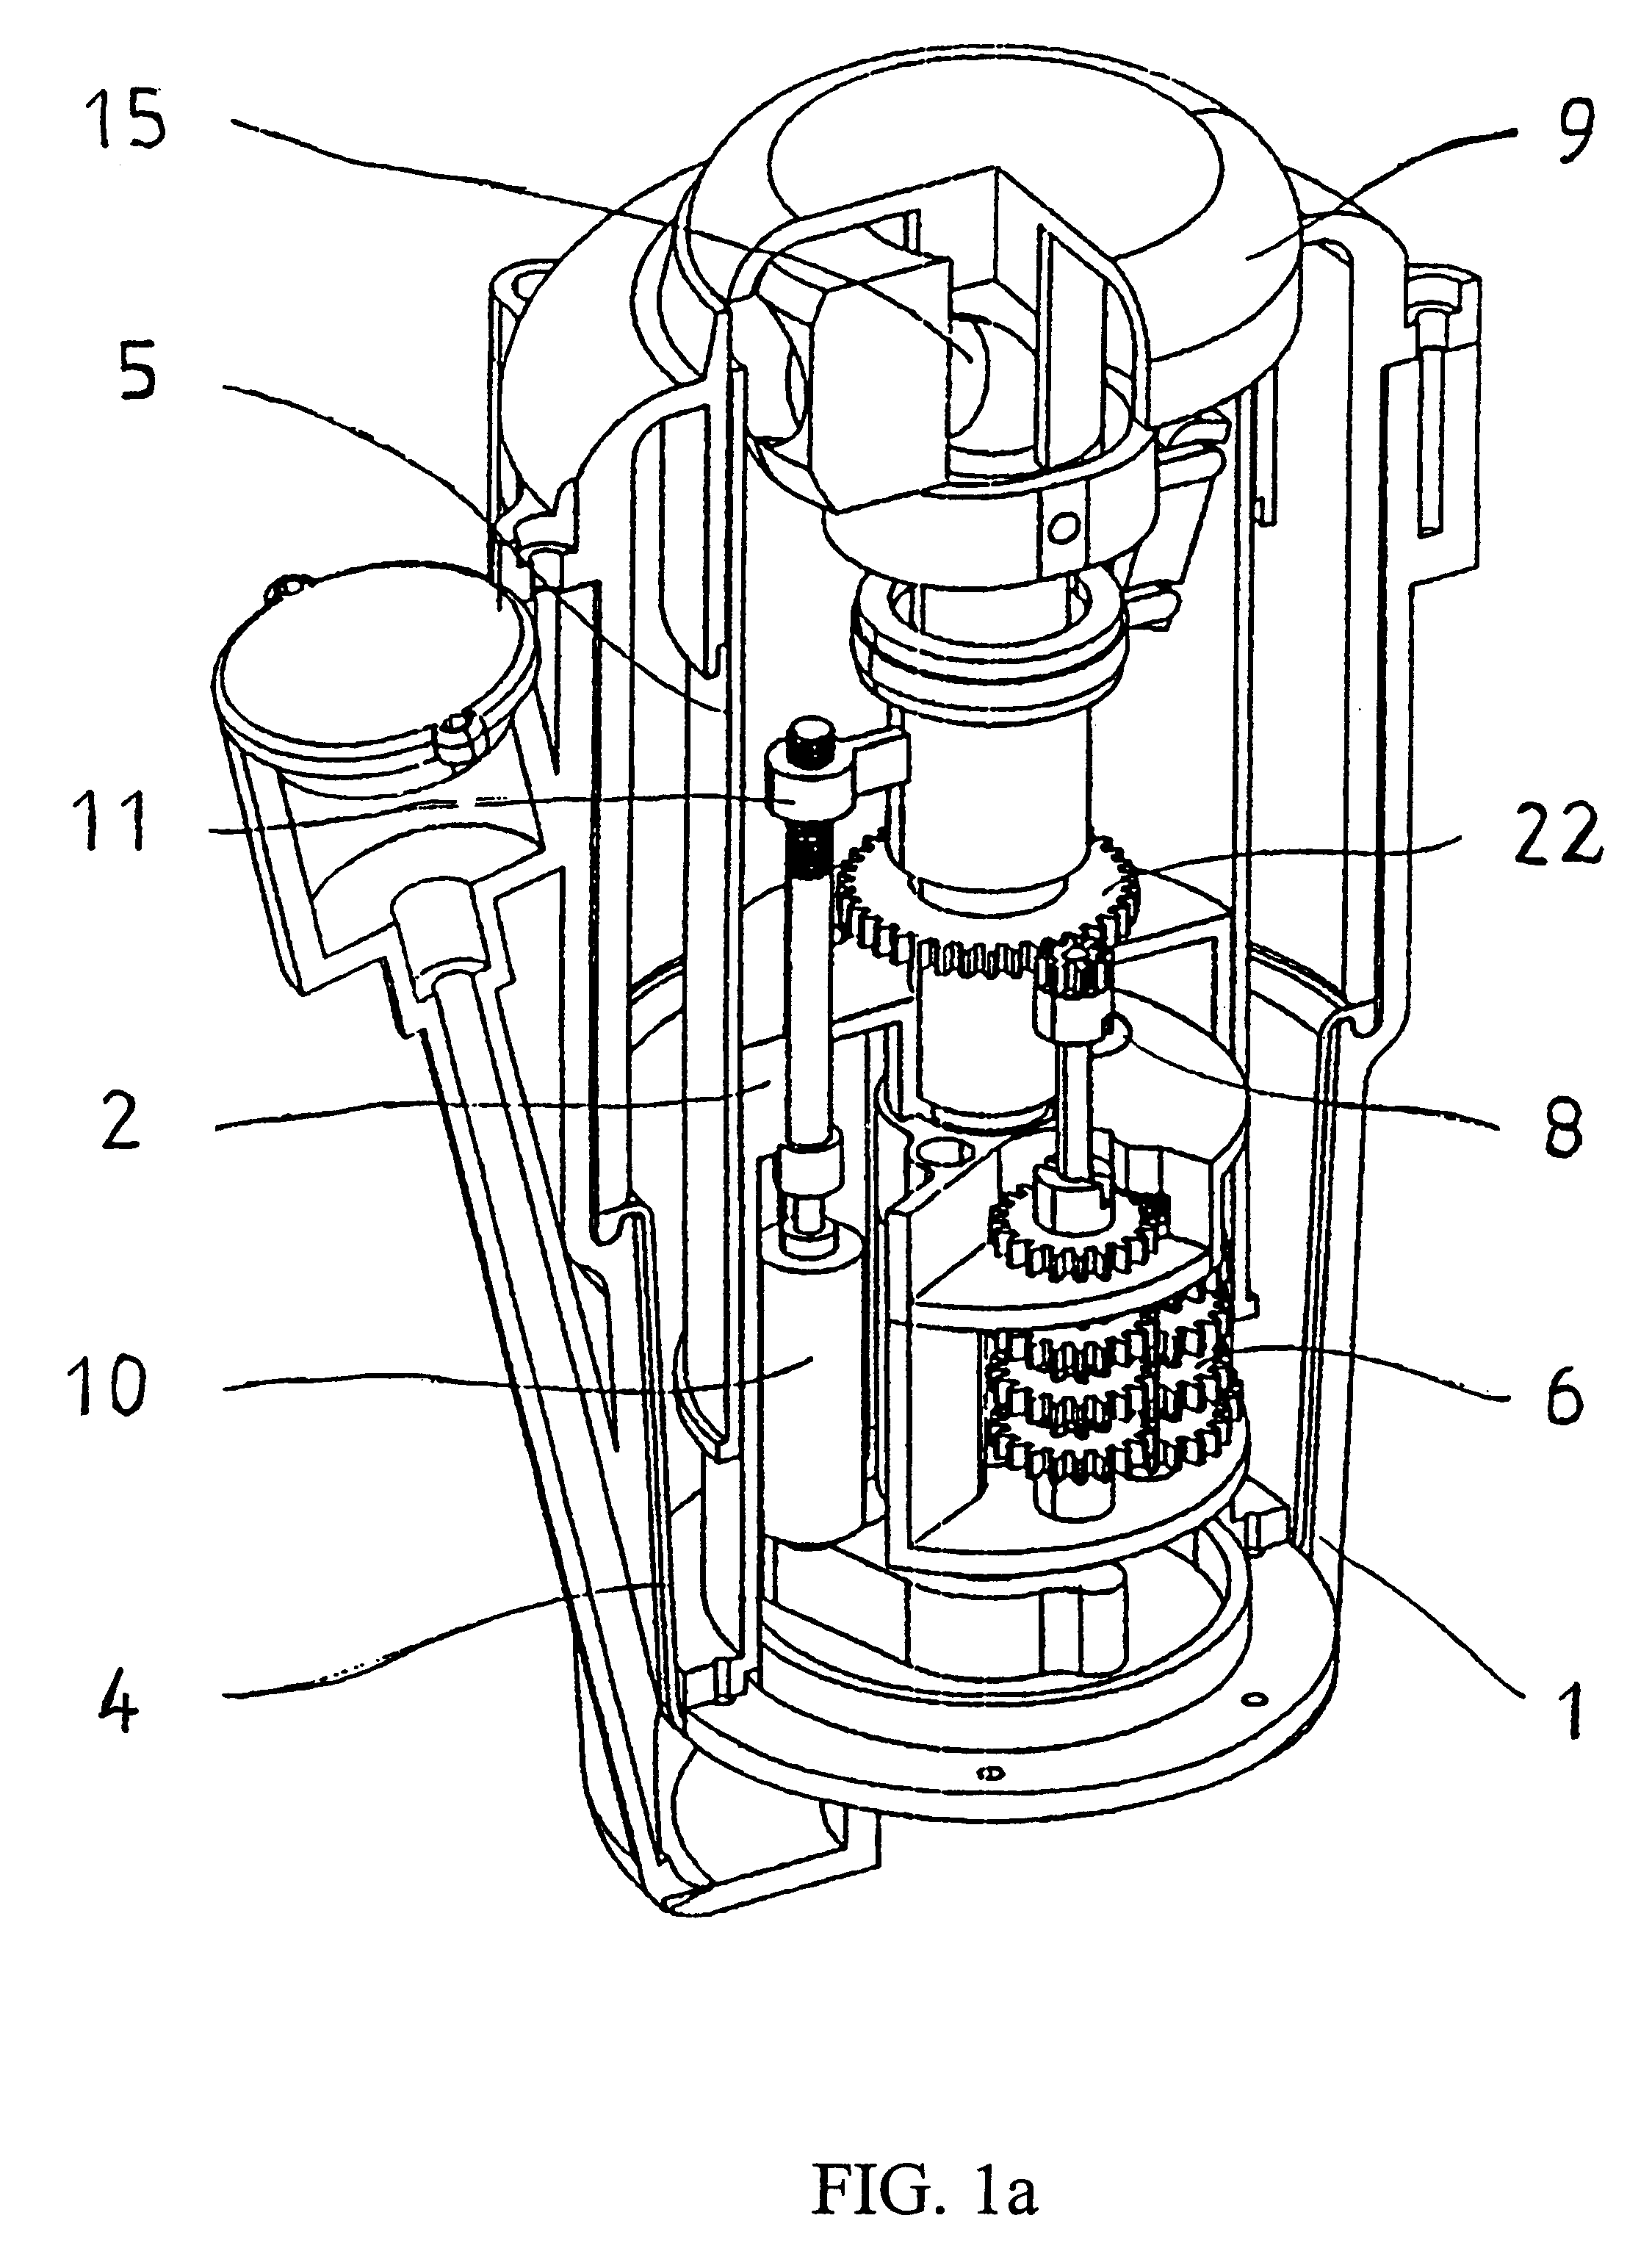 Electrically operated sprinkler